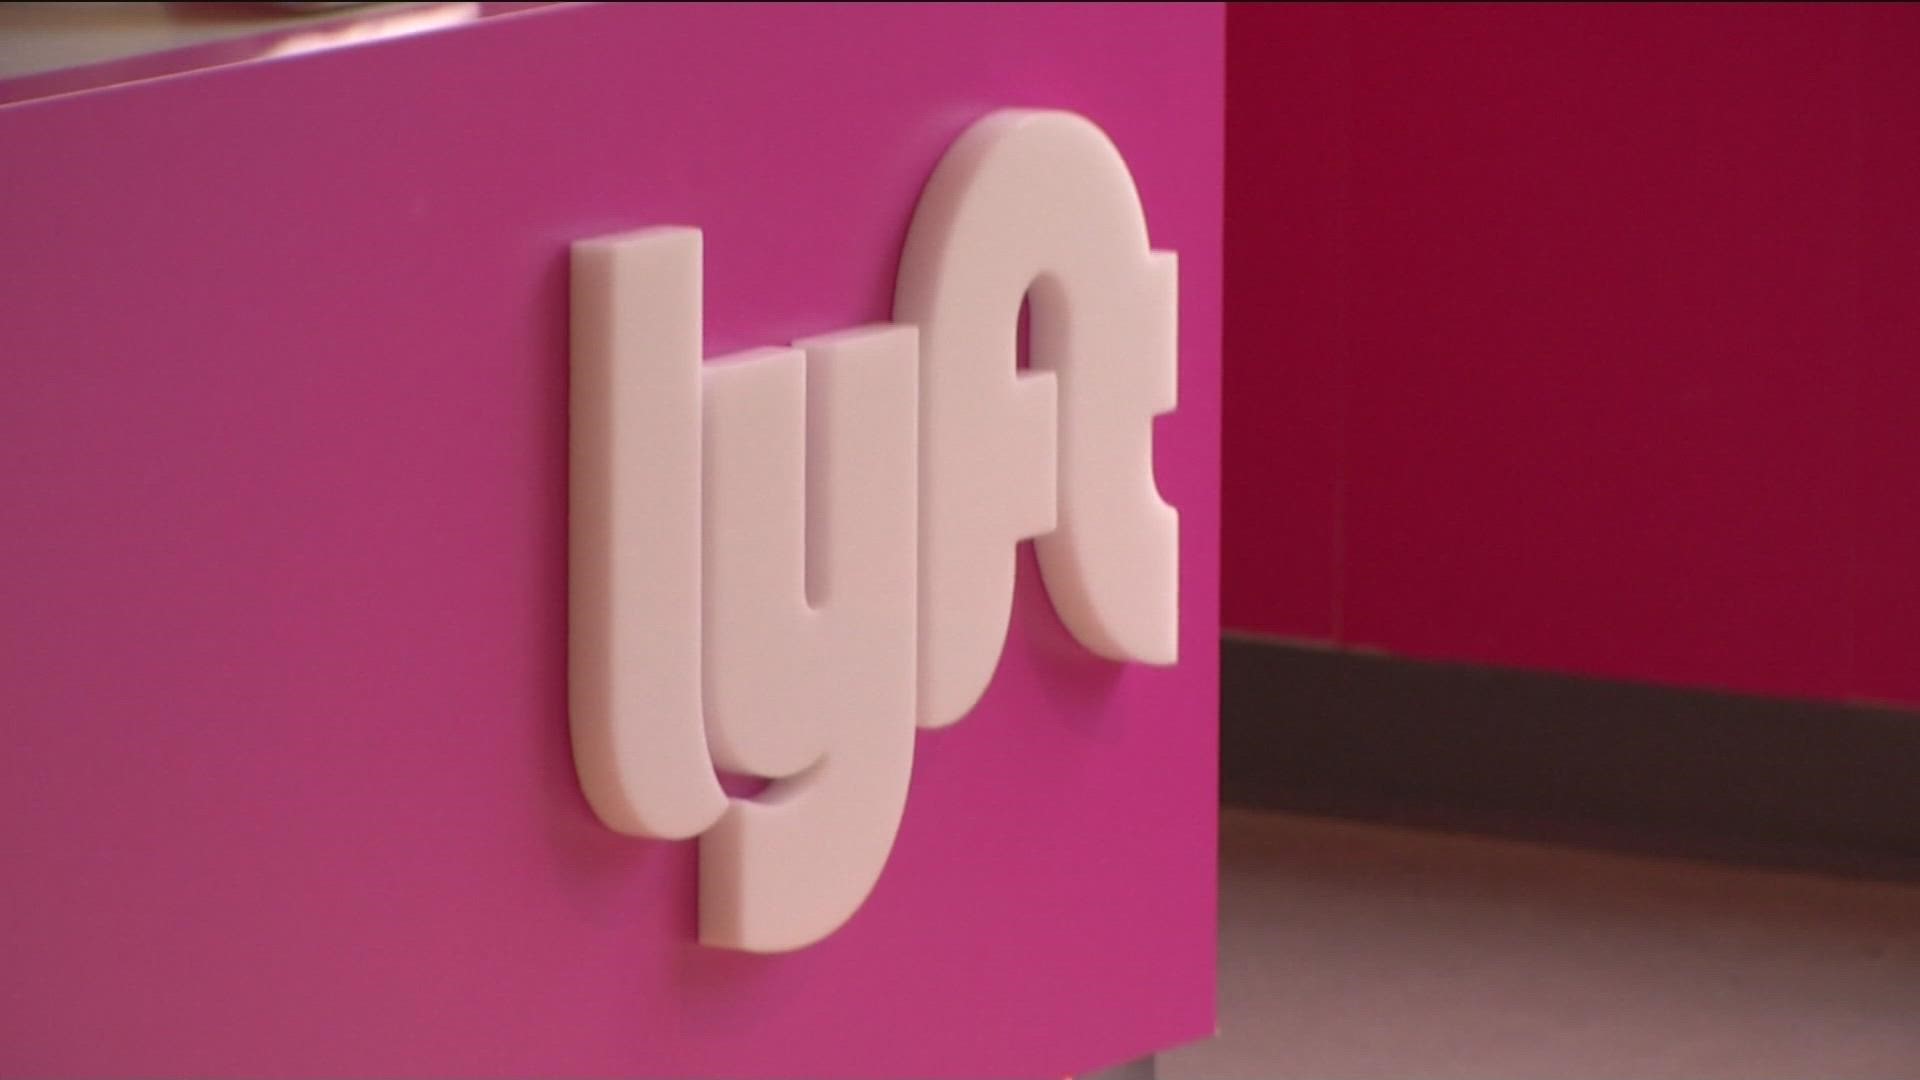 Seventeen new lawsuits were filed against ridesharing company Lyft alleging patterns of both passenger and driver assaults.